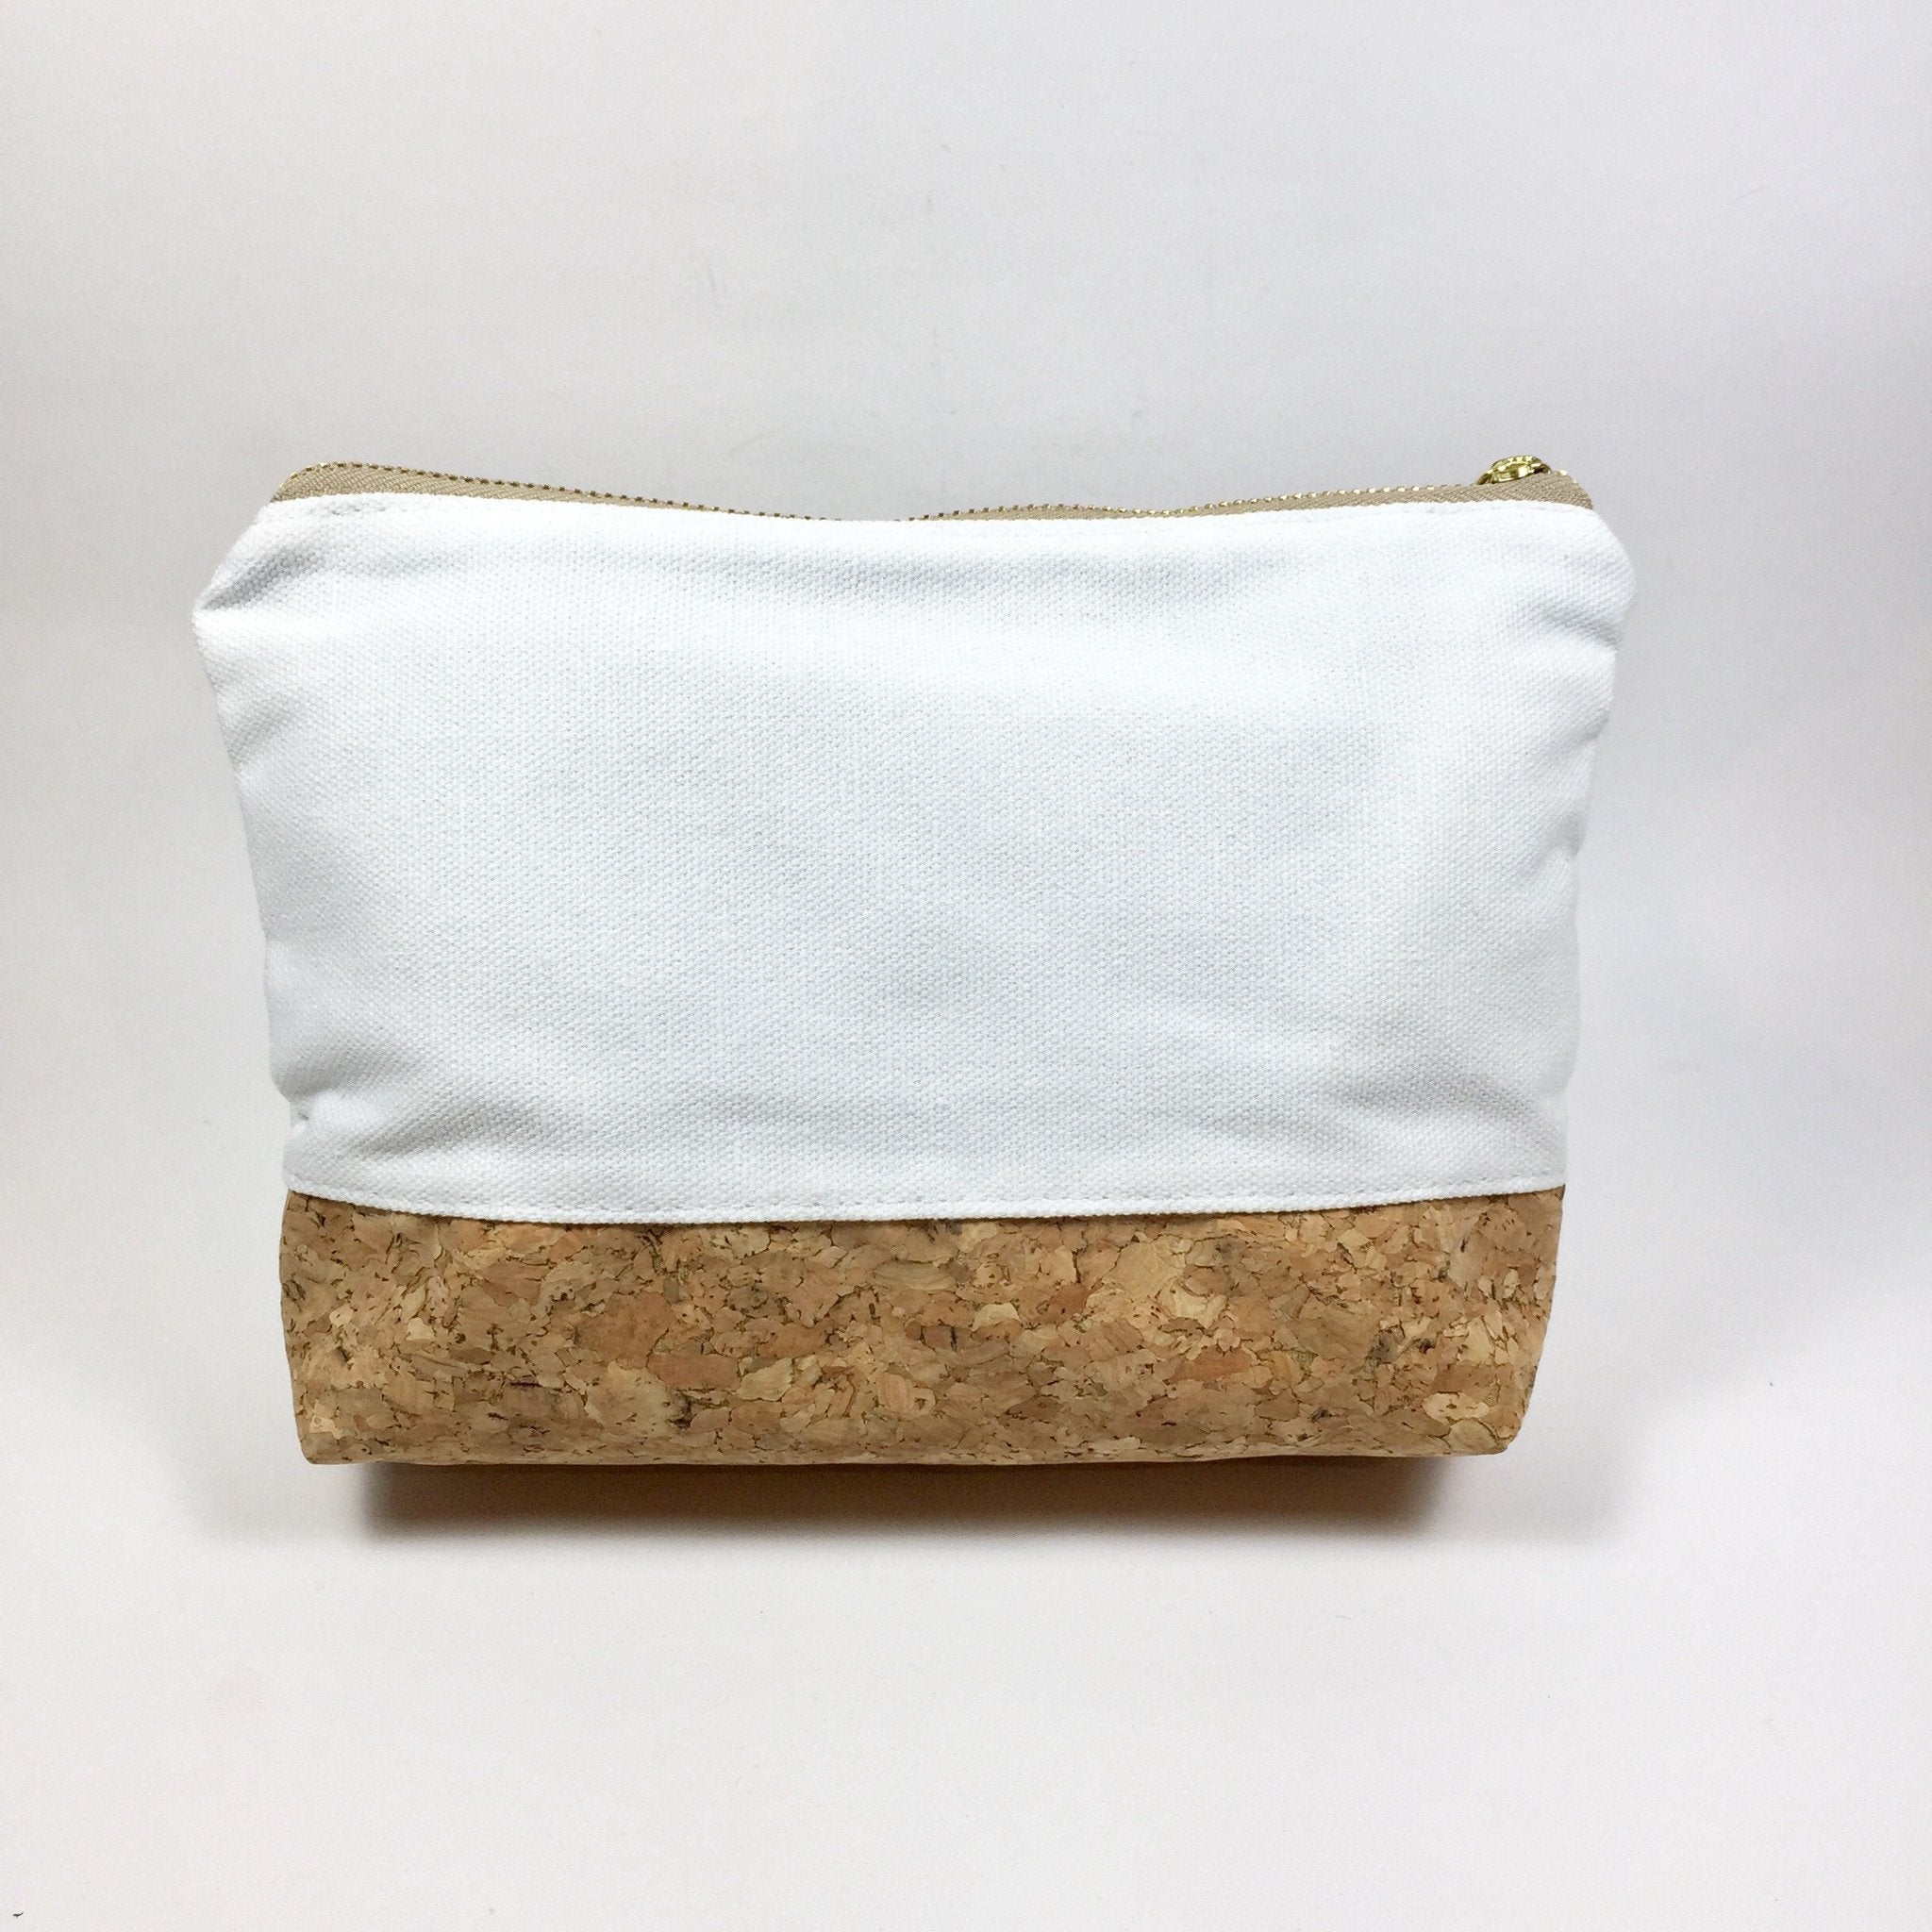 Miley Cork Pouch in White Canvas